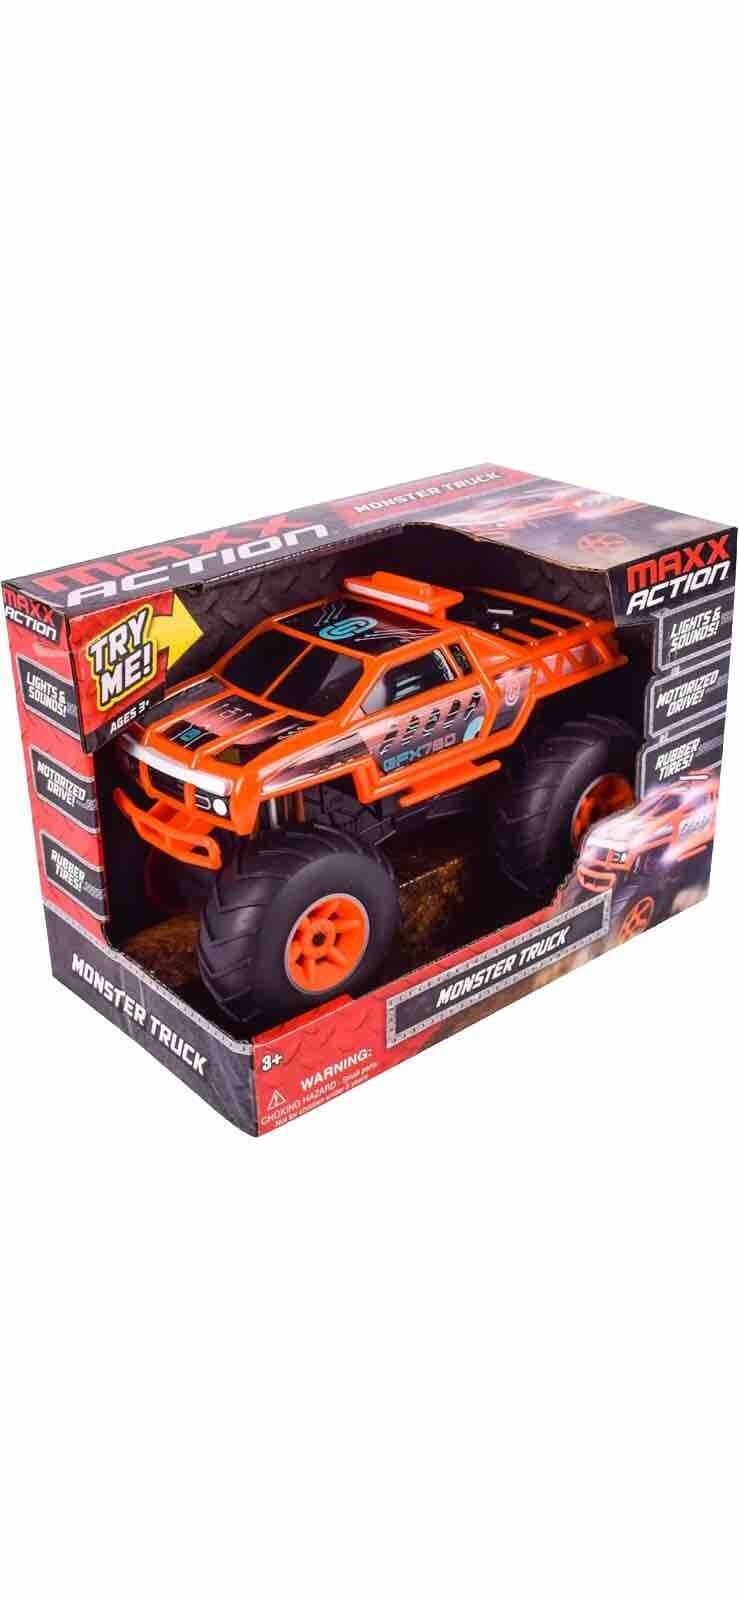 Maxx Action GFX750 Monster Truck - Lights & Sounds Motorized Car | New In Box |